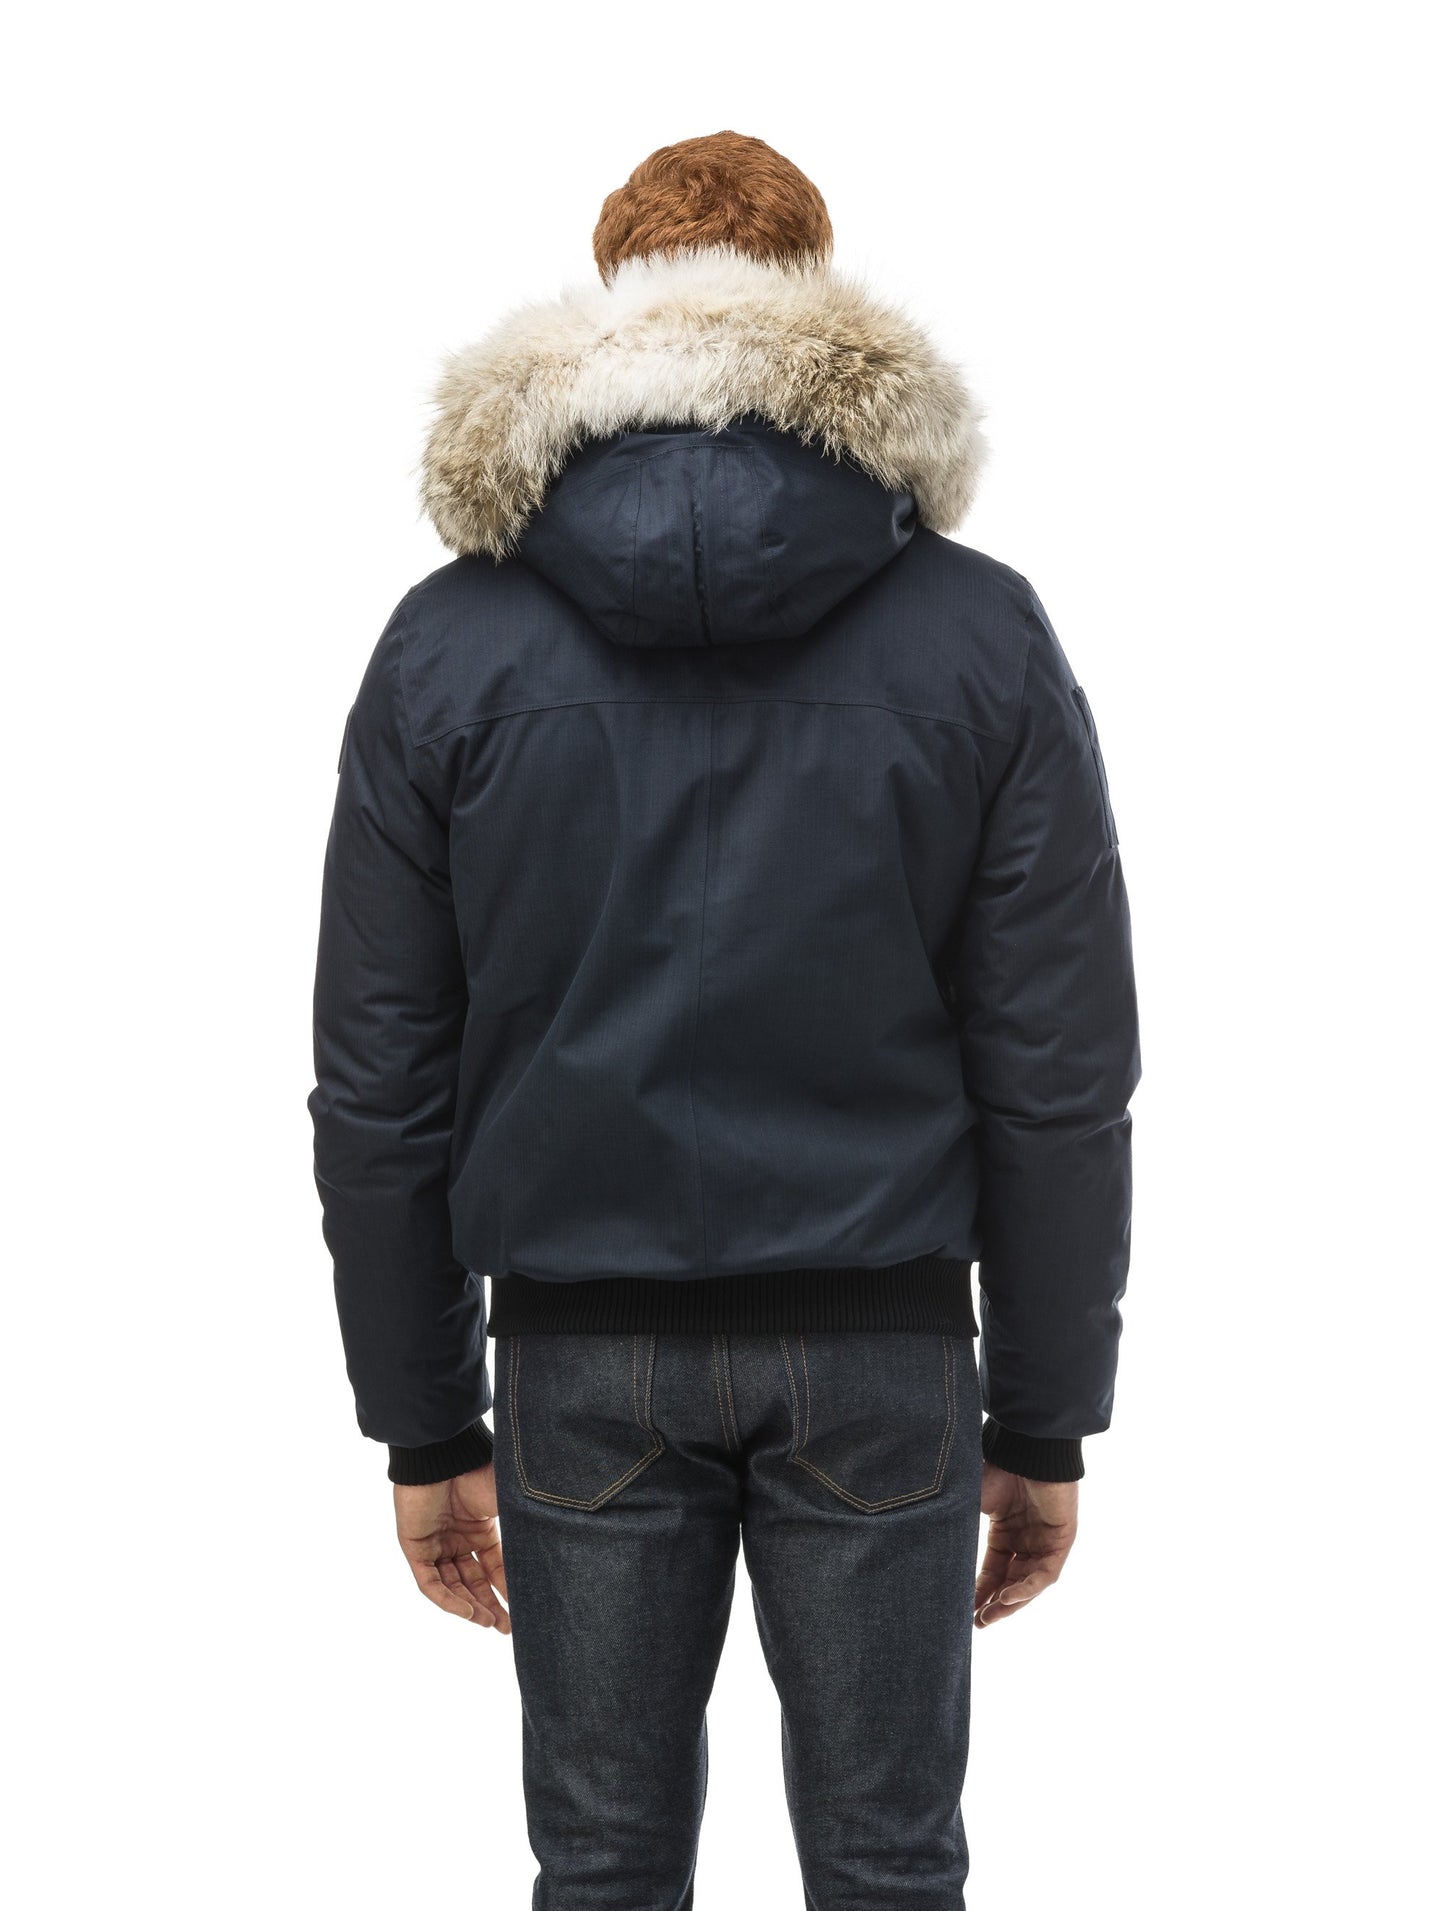 Men's classic down filled bomber jacket with a down filledÃ‚Â hood that features a removable coyote fur trim and concealed moldable framing wire in Navy